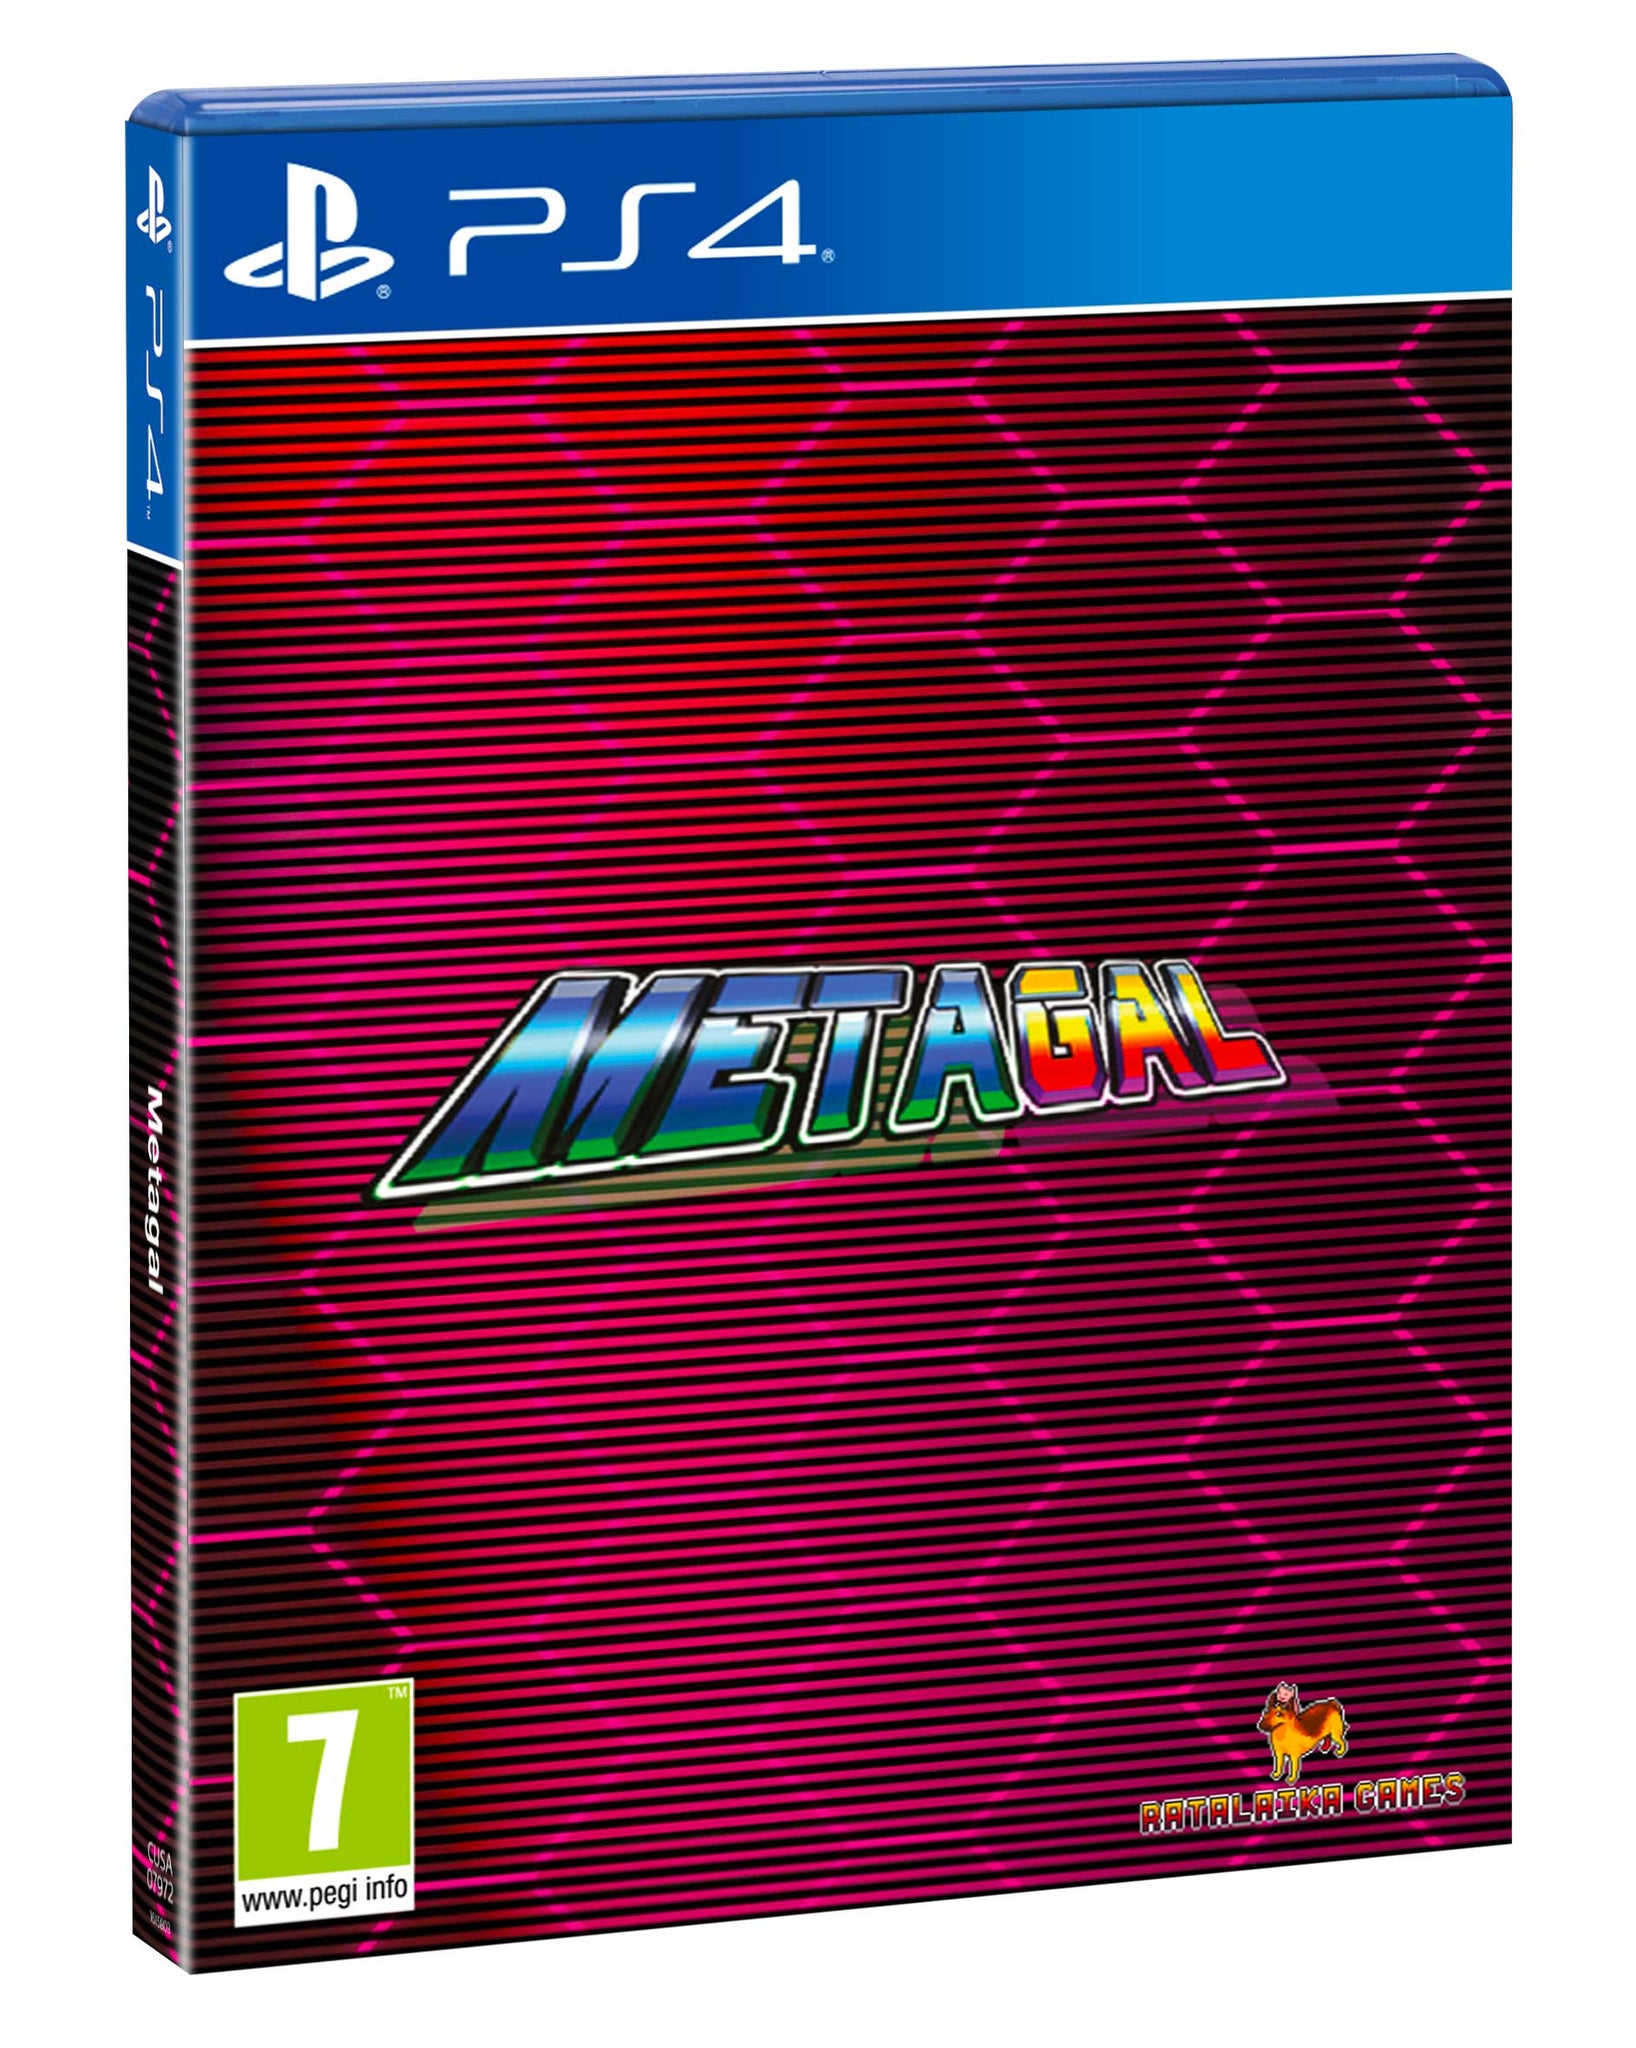 Metagal (PAL Import - Cover in French - Plays in English) - PS4